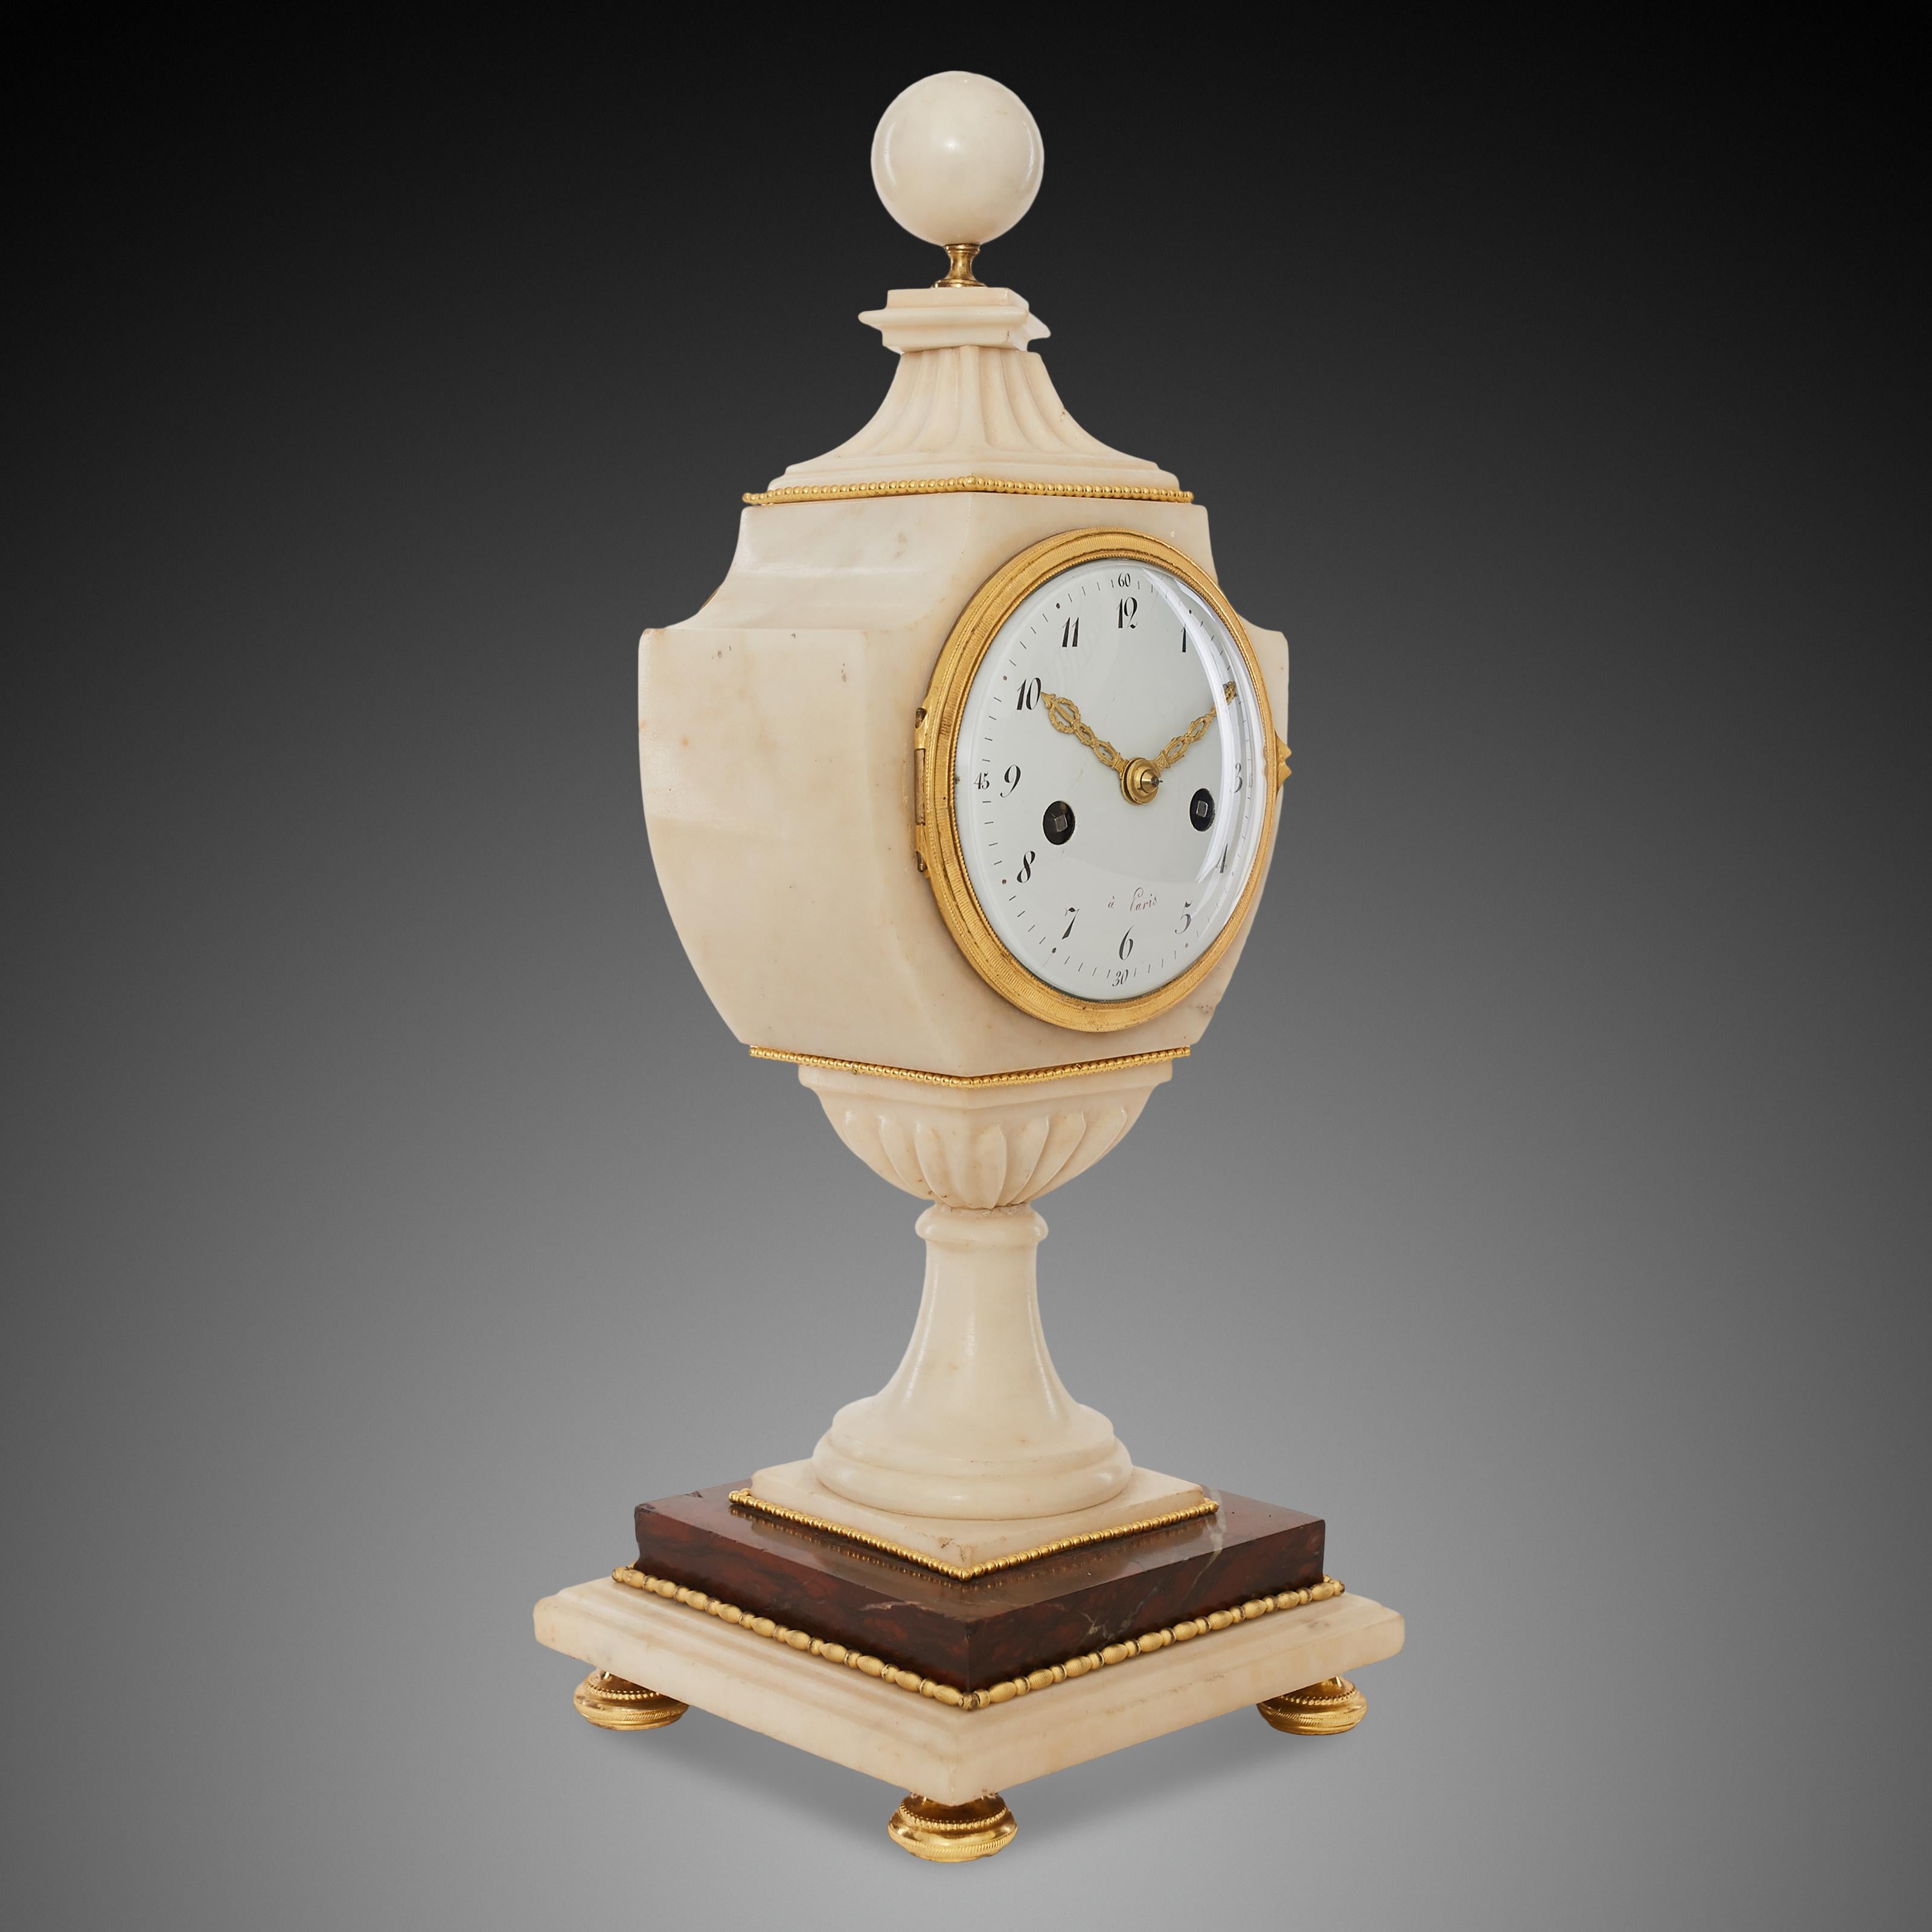 This antique mantel clock was created in Paris at the end of 18th century. The main body of the mantel clock is made of white marble along with Napoleon red marble fragment at the base,which makes the mantel clock look rich and lavish. On top of the